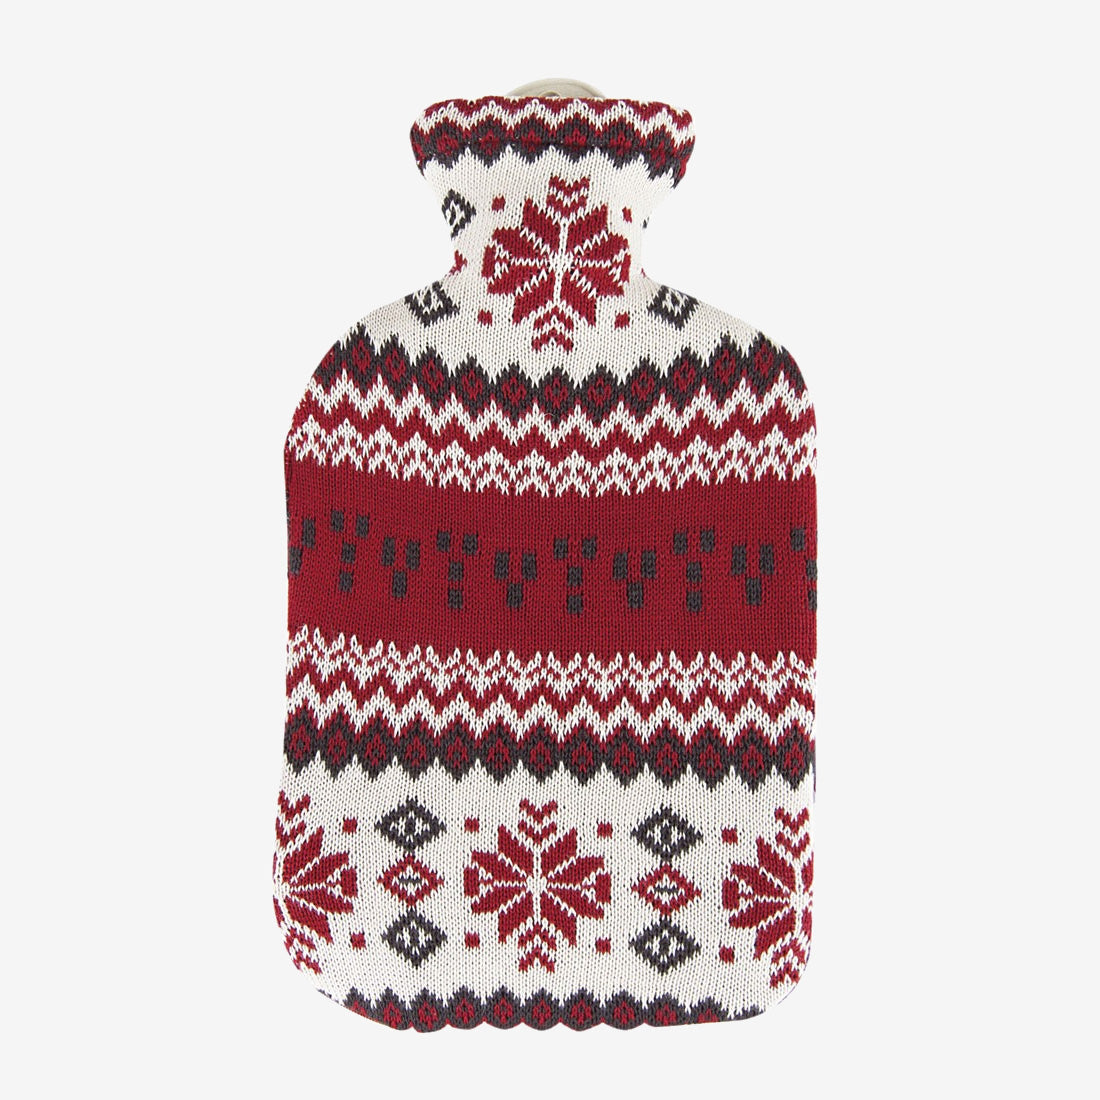 Hot Water bottle with Knitted Cover